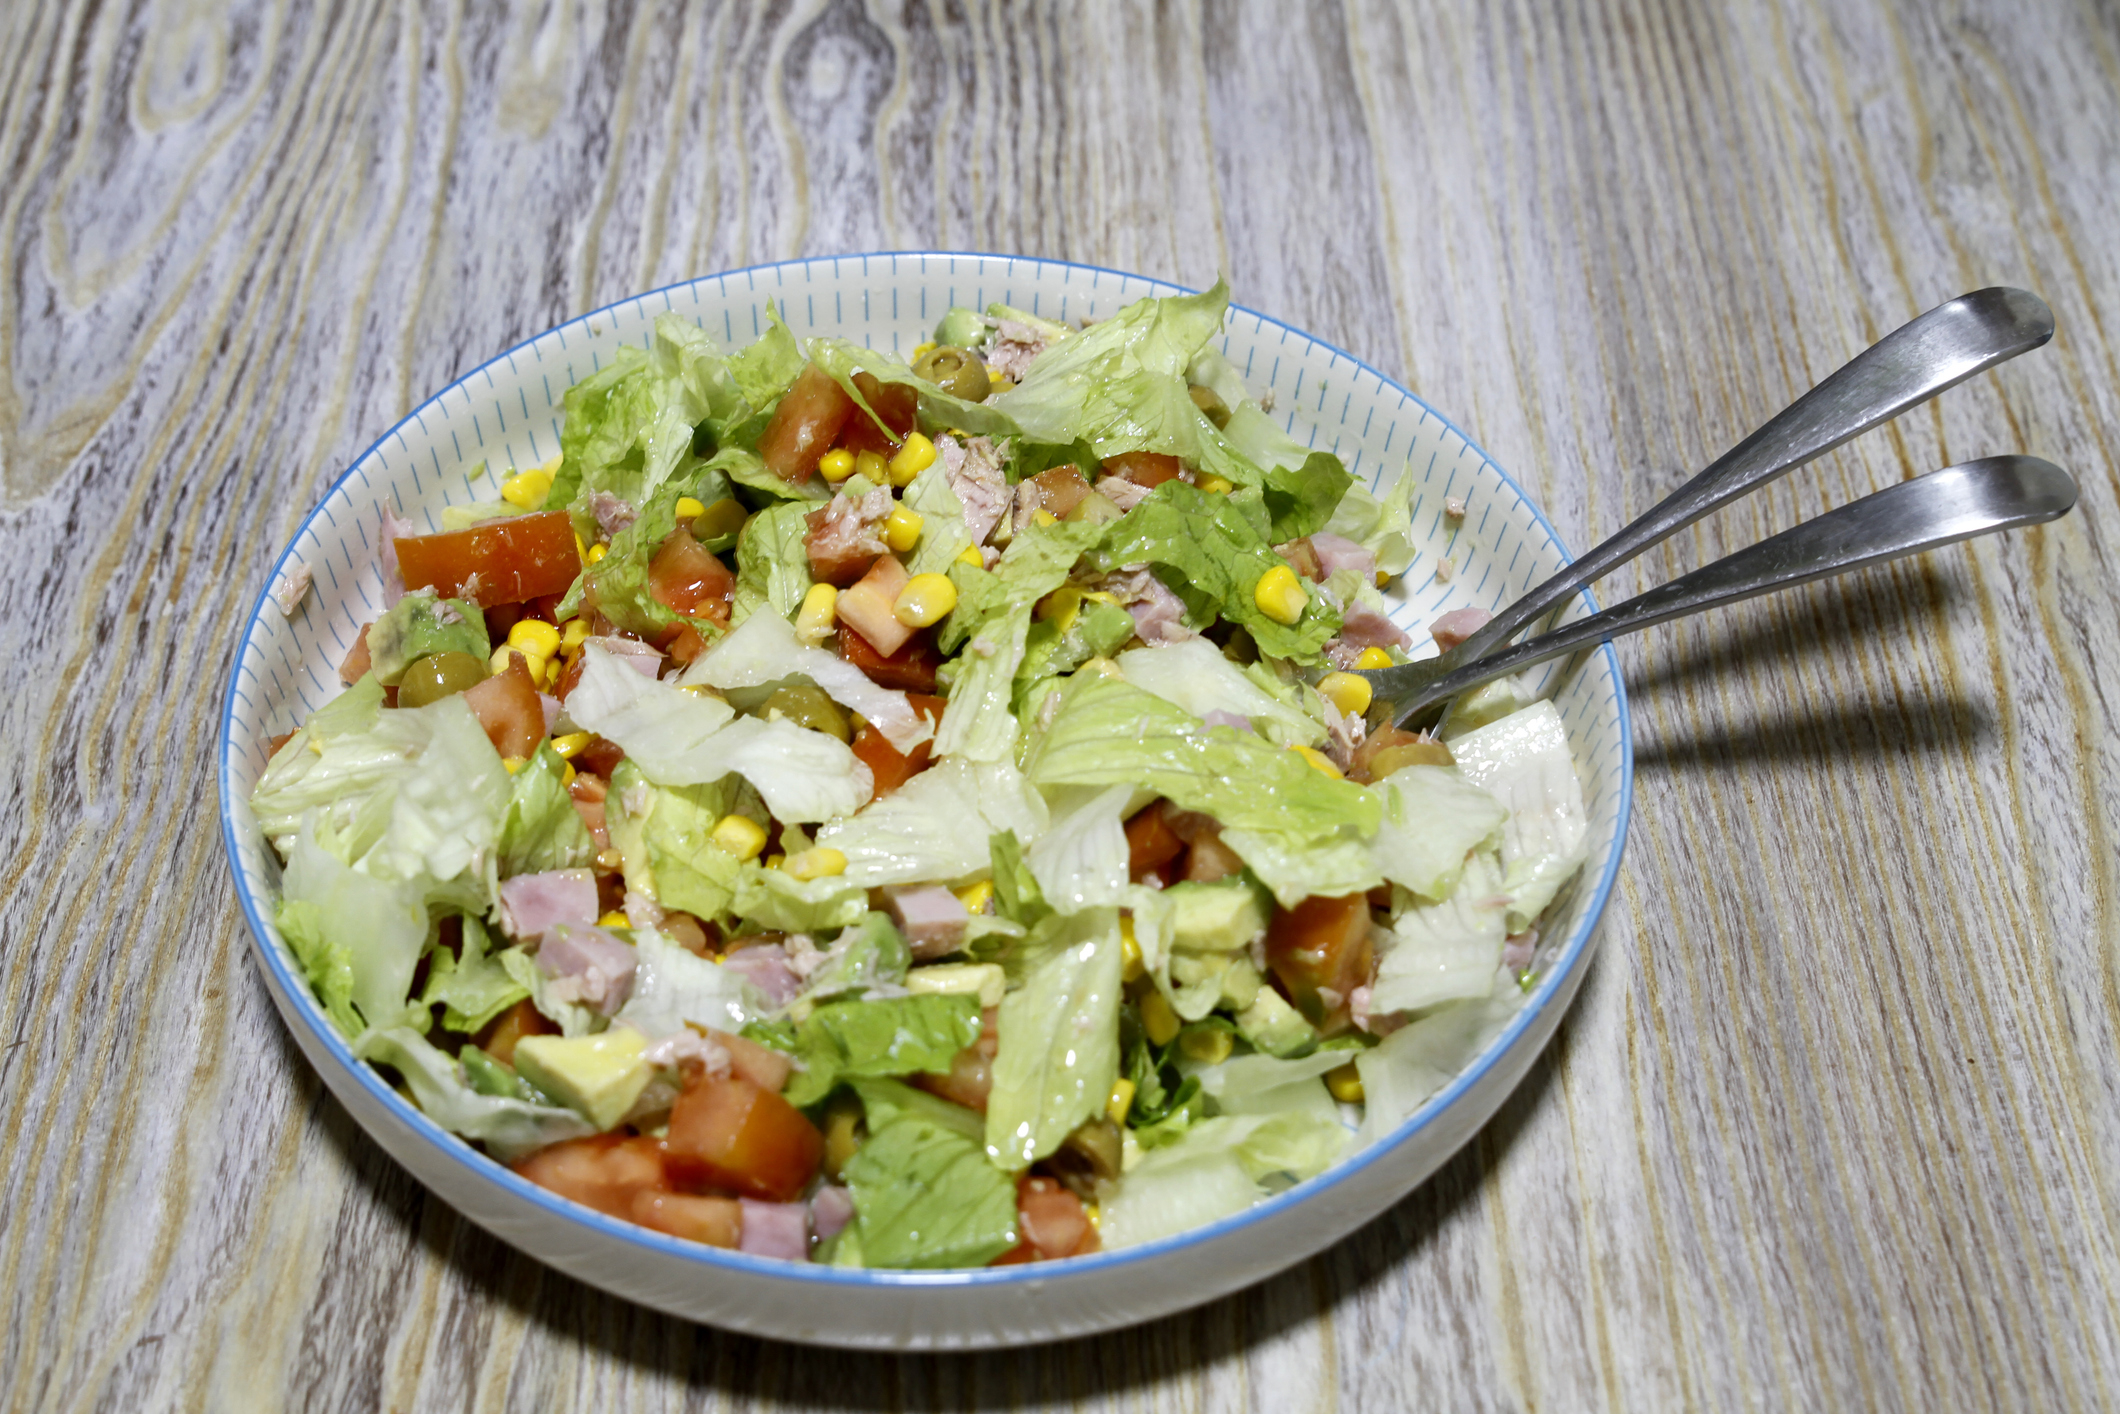 A bowl of mixed salad with lettuce, tomatoes, corn, and diced ham, with tongs on a wooden surface